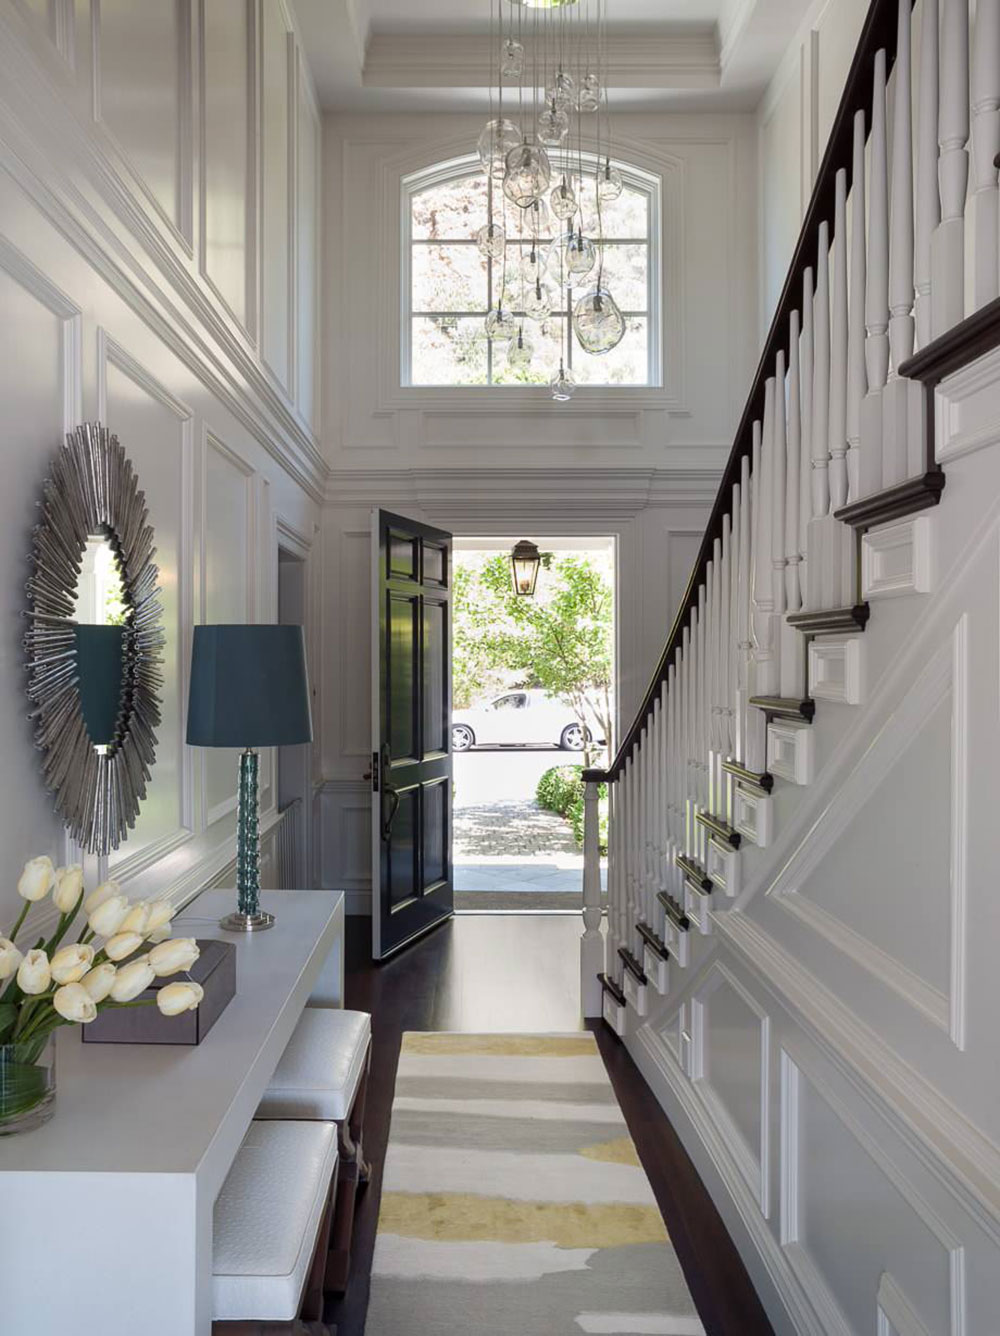 Impressive-Design-Ideas-For-Foyers11 Decorating A Foyer: Not A Big Deal When You Have These Ideas